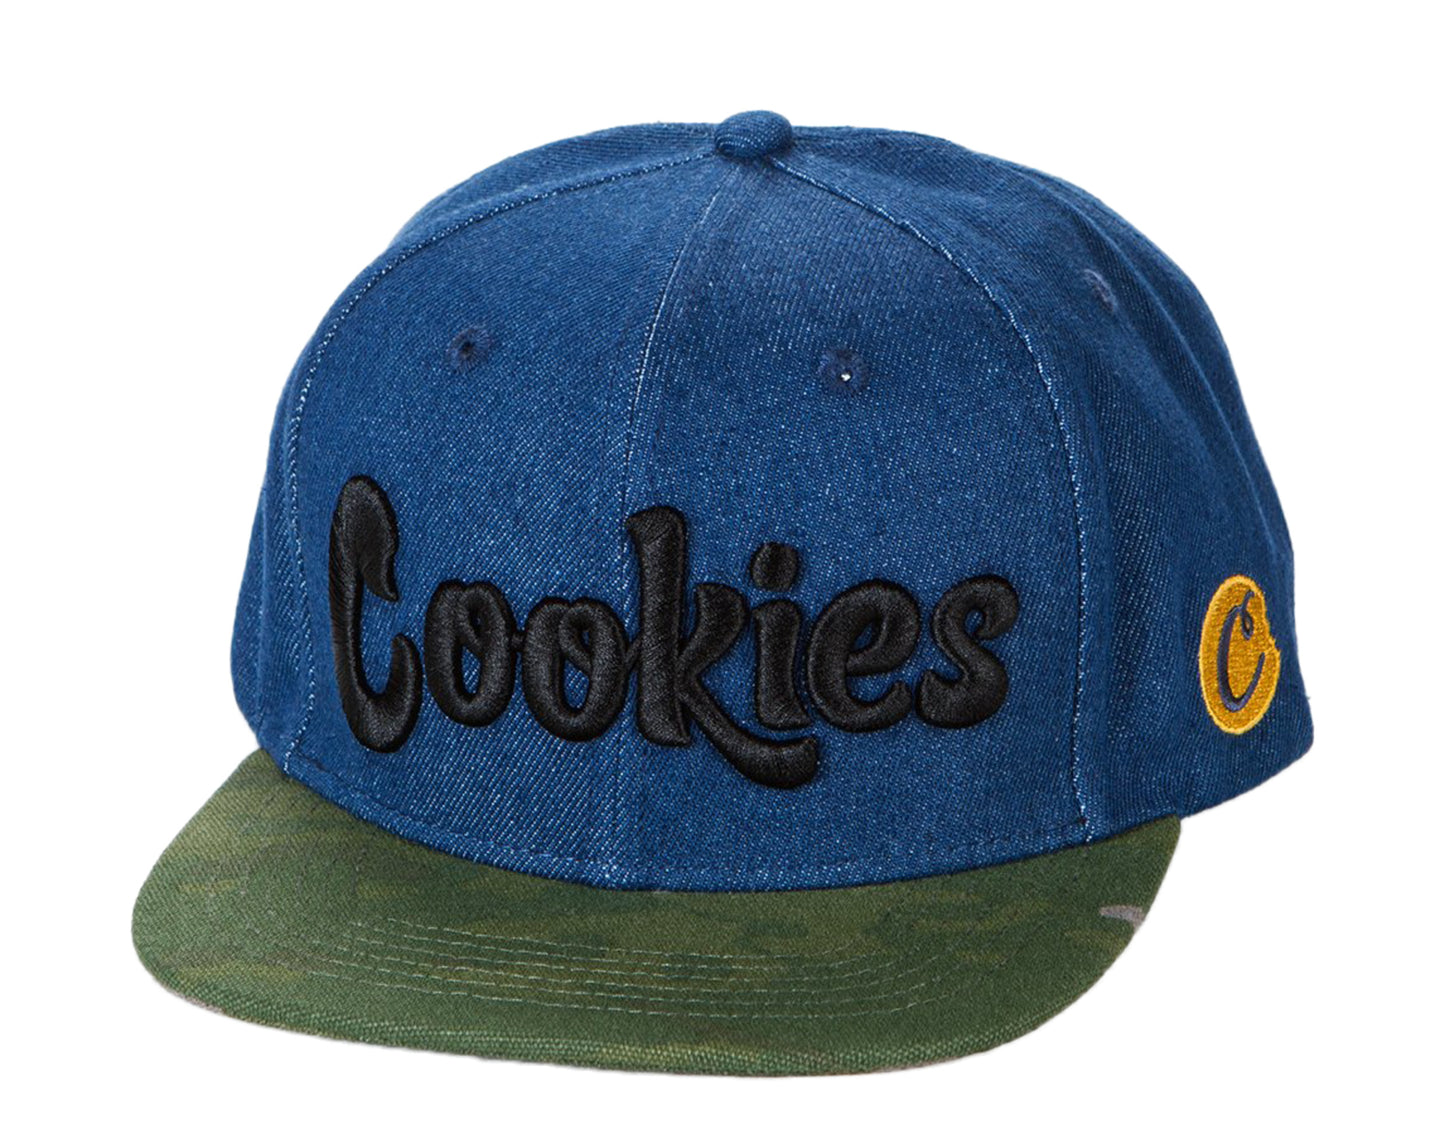 Cookies Backcountry Denim Embroidered Logo Camo Blue Snapback Hat 1546X4317-BLD